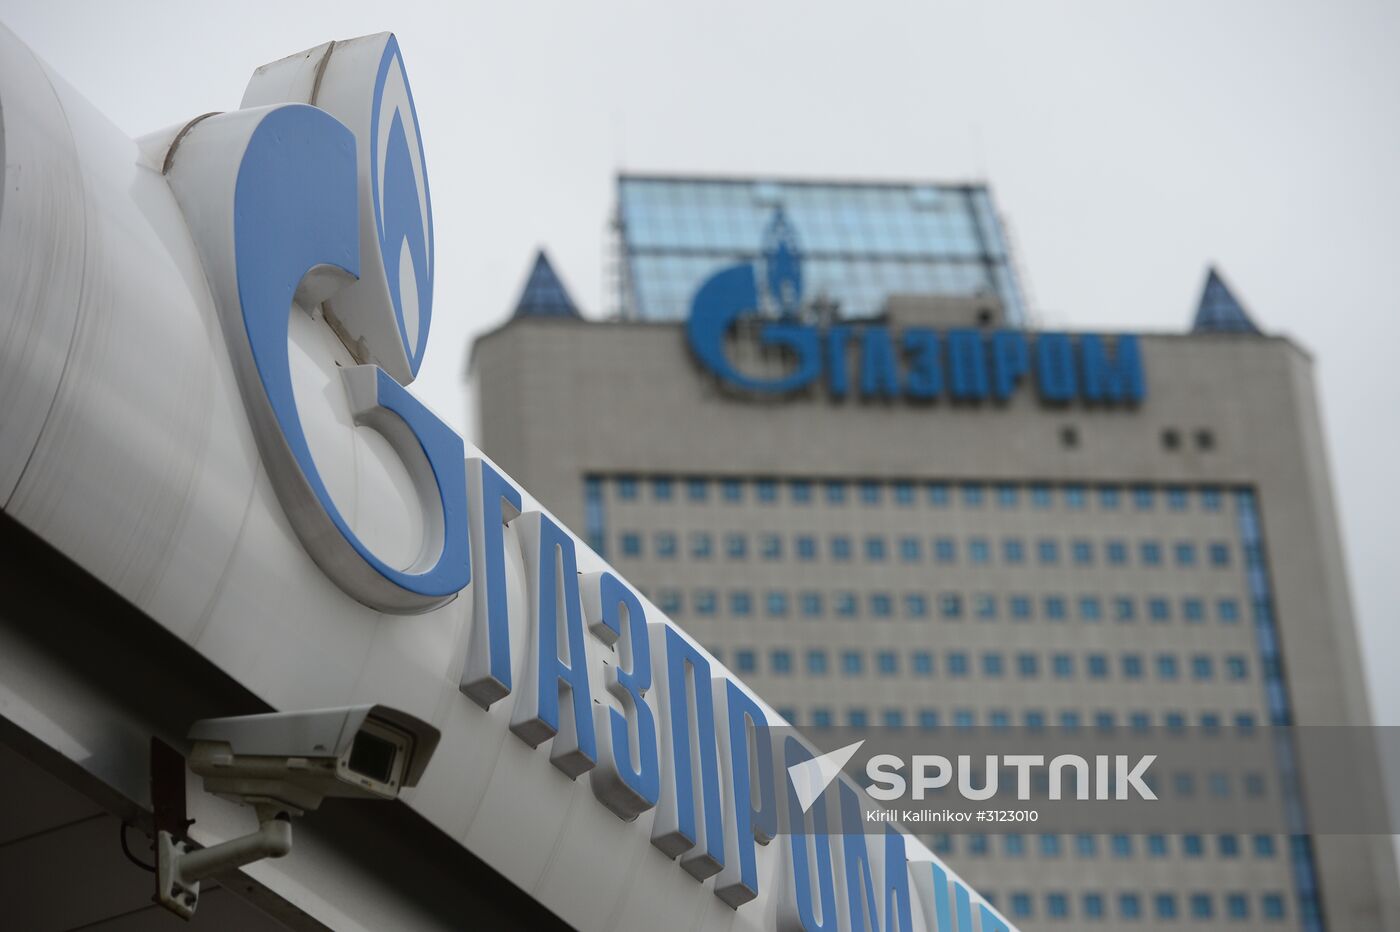 Gazprom office in Moscow